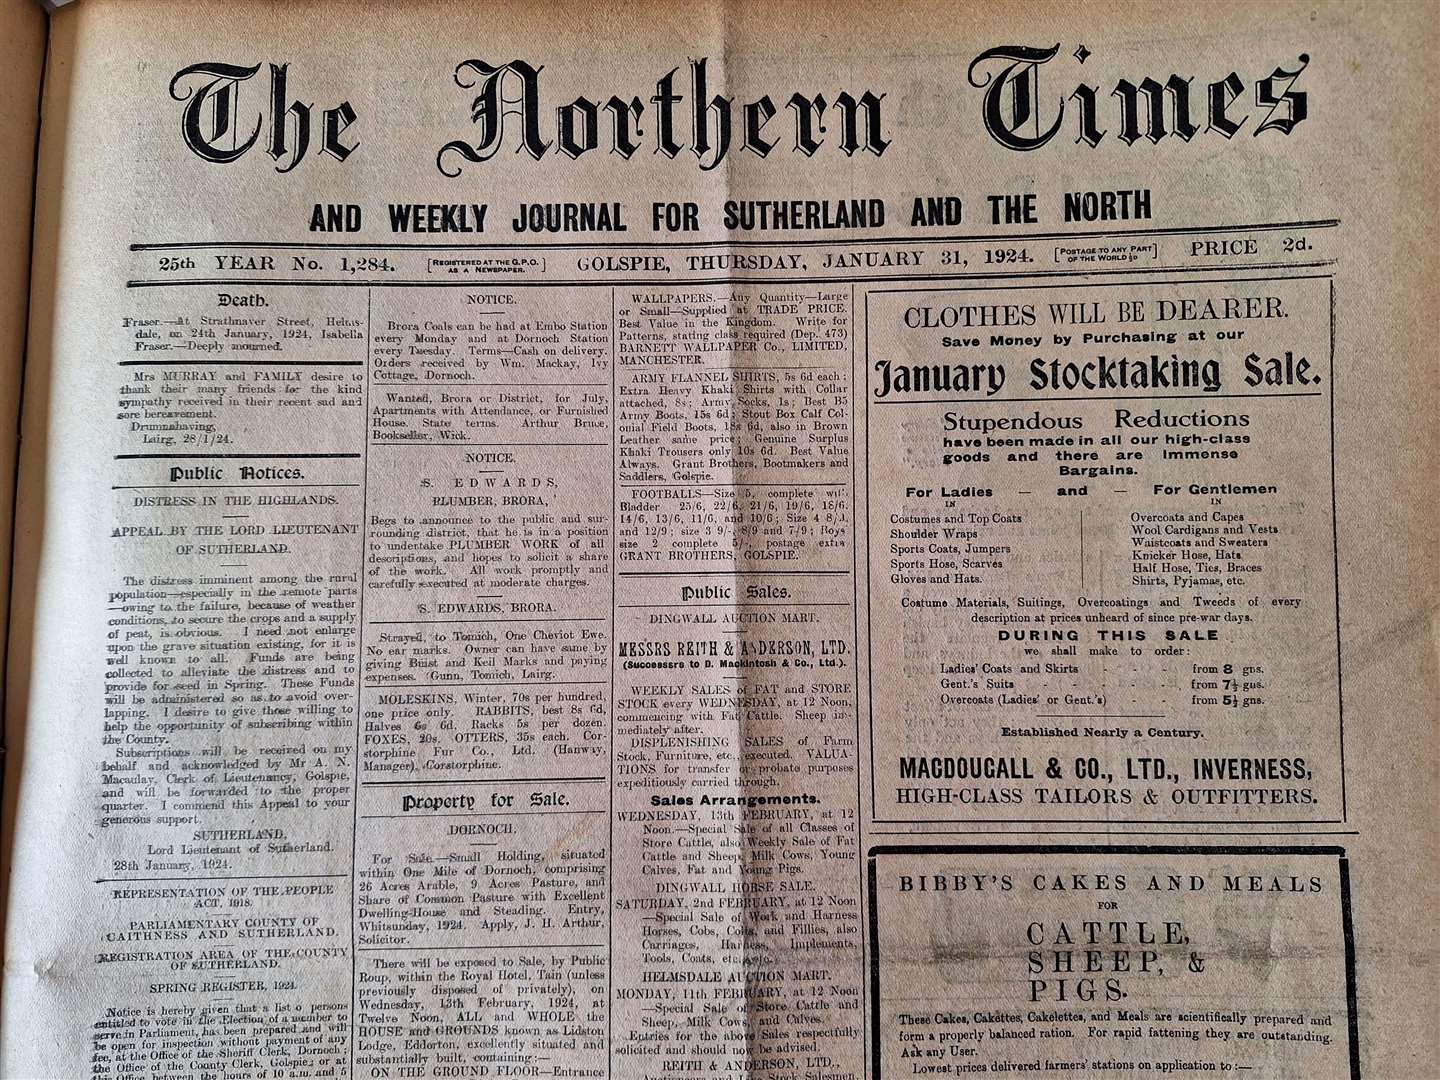 The edition of January 31, 1934.